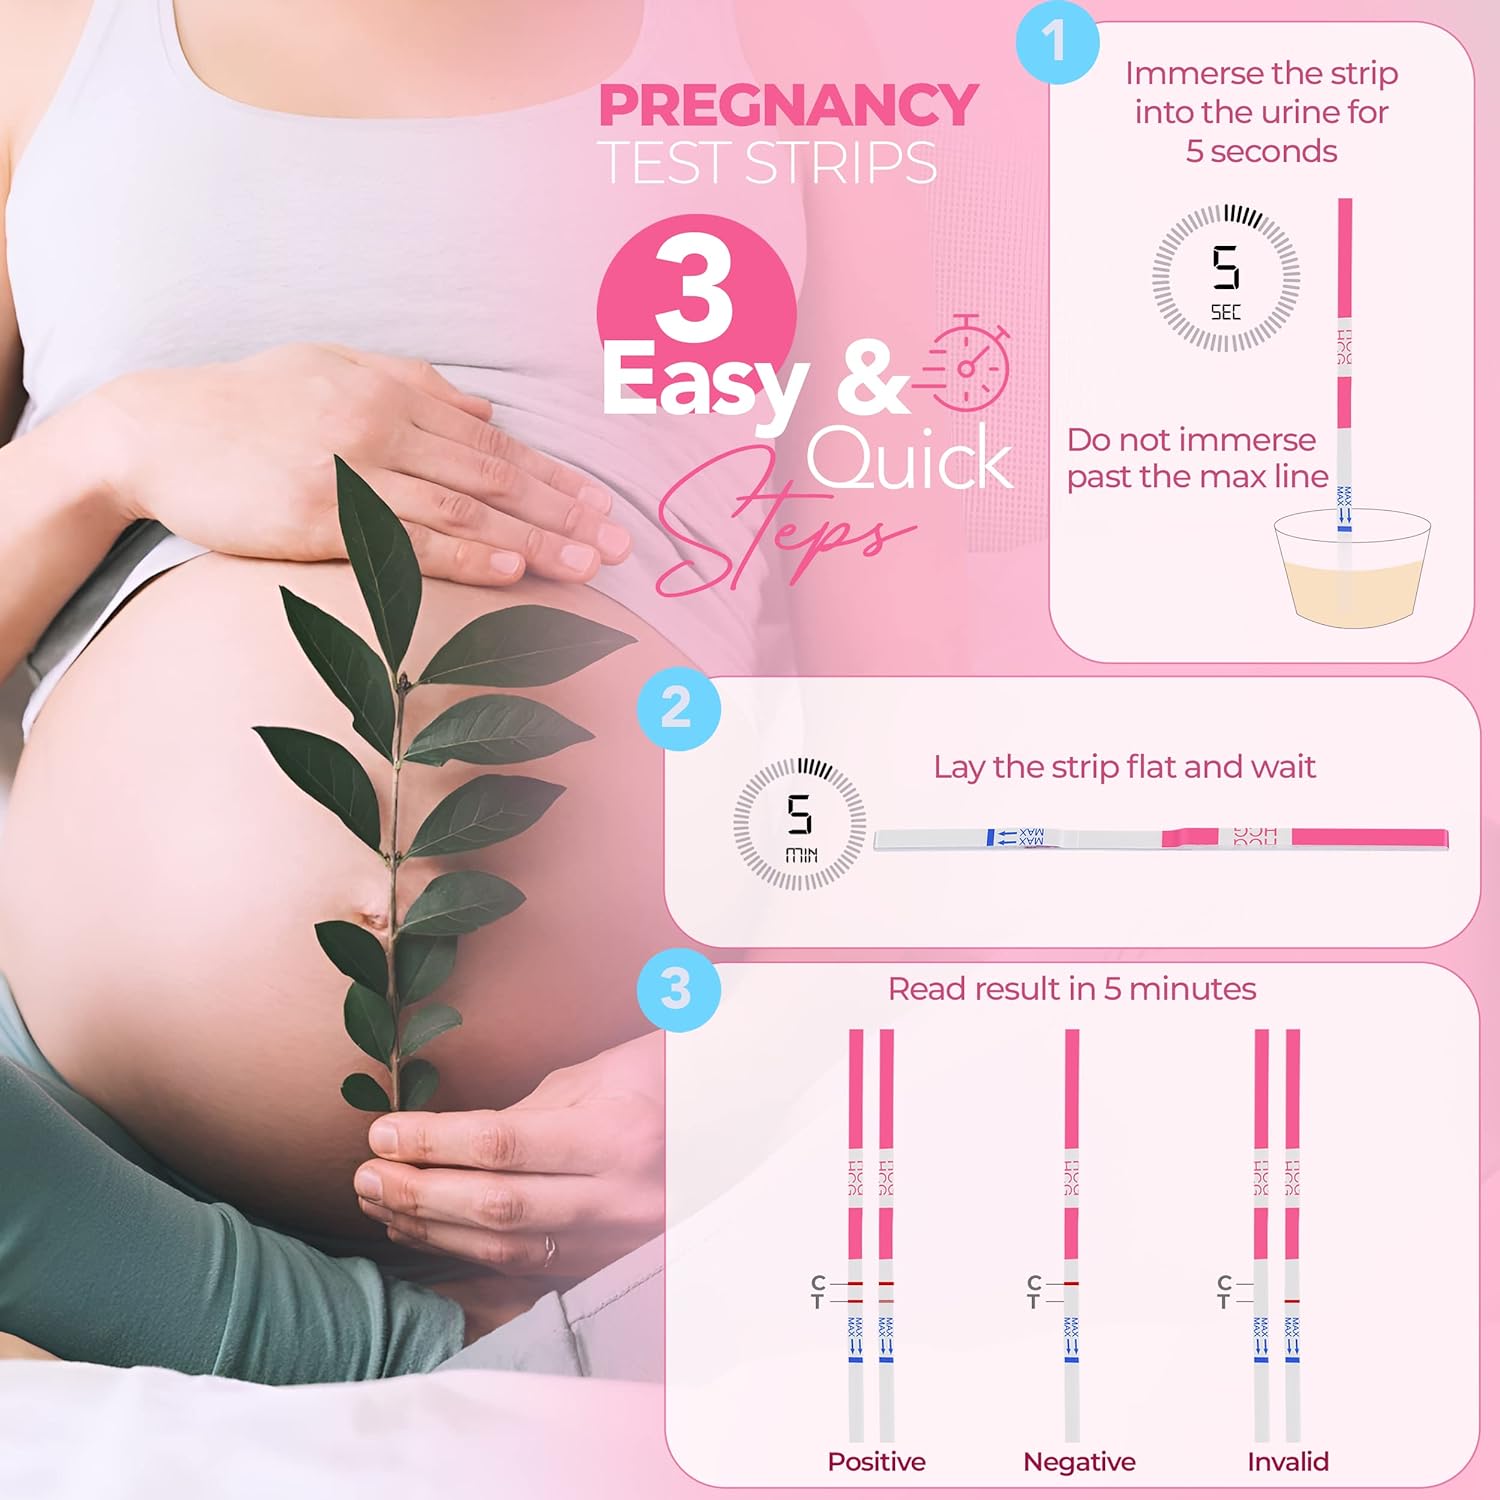 Combo Ovulation and Pregnancy Urine Test Strips Image 1 - Pregnancy Test User's Guide